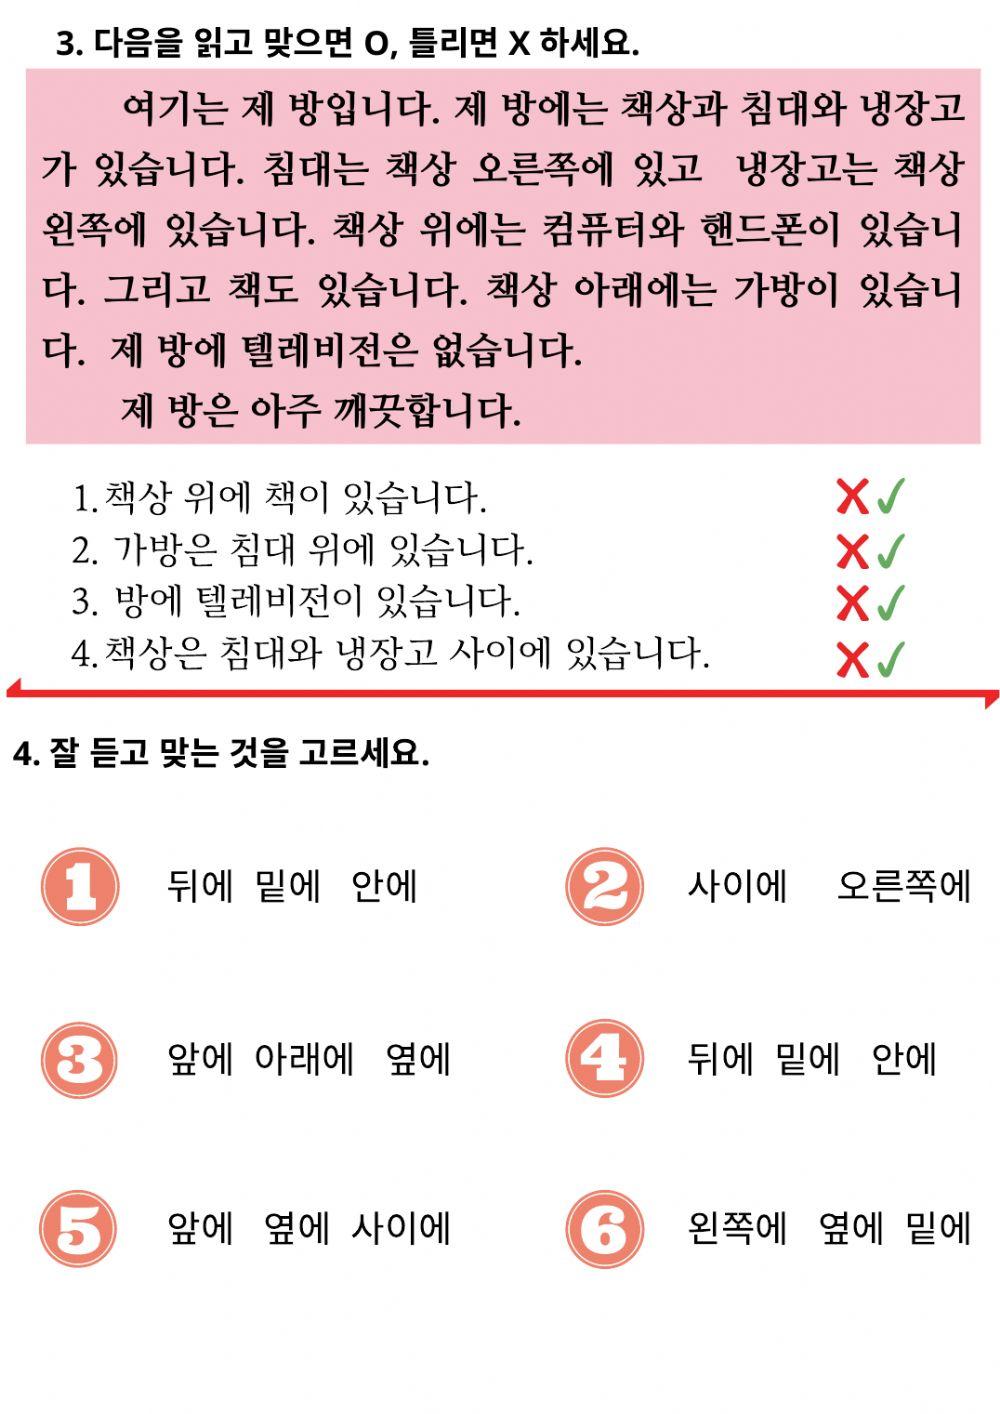 Korean prepositions of place 위치